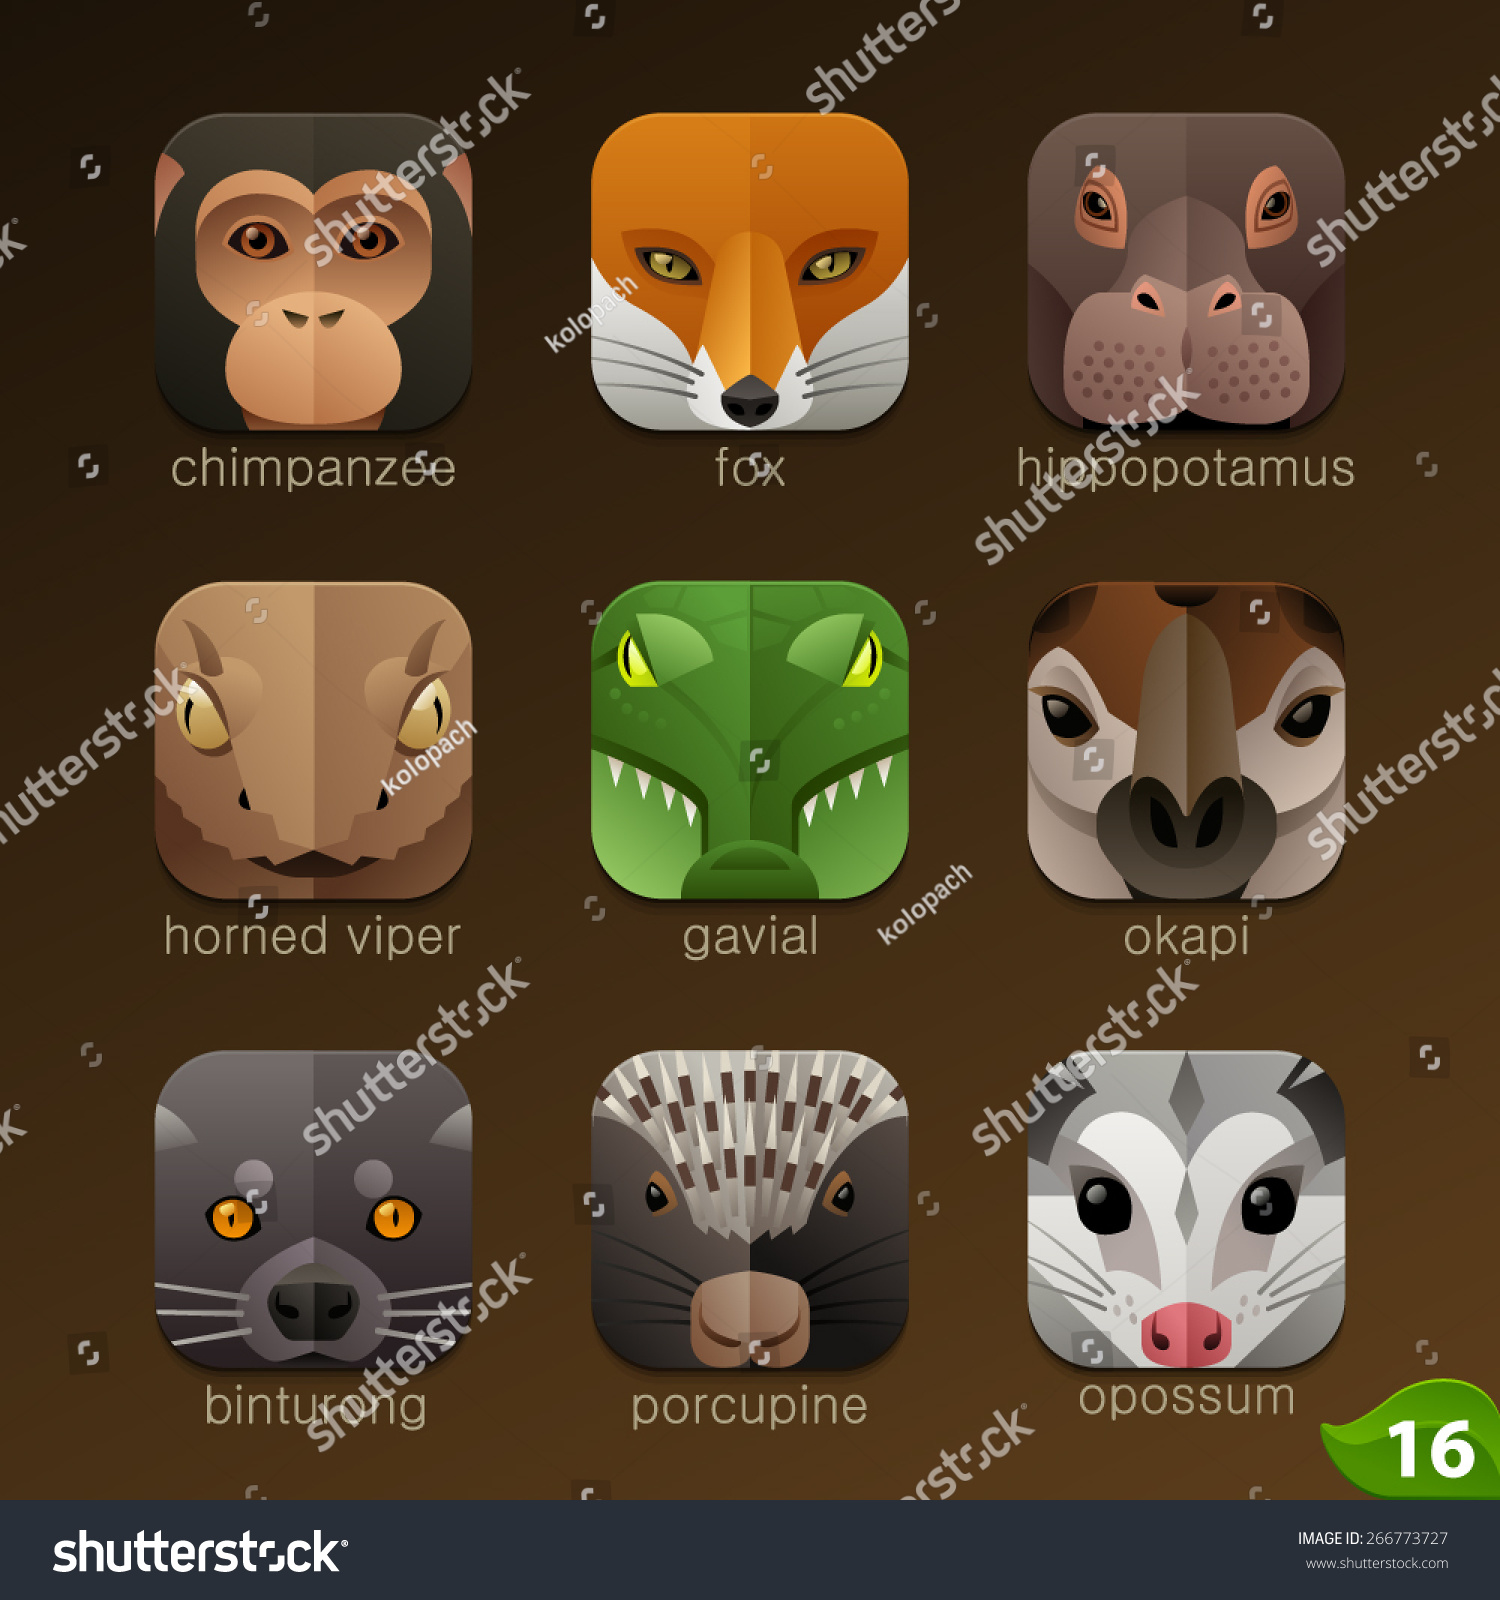 SVG of Animal faces for app icons-set 16 svg